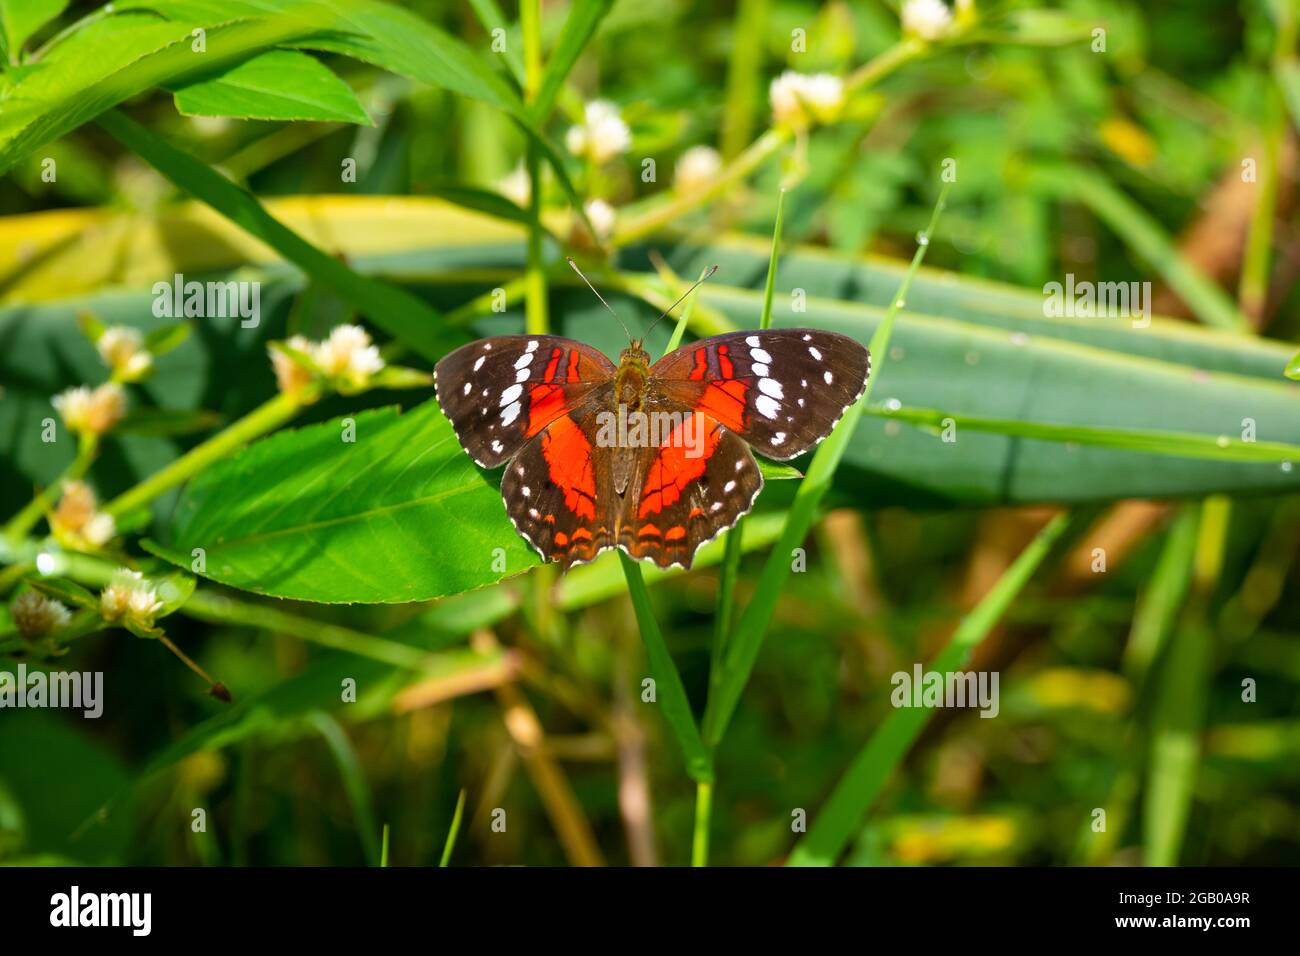 Butterfly called as Brown, Scarlet or Red Peacock (peacock) (Anartia amathea). She Perches on the Leaves of a Plant on a Sunny Day Stock Photo